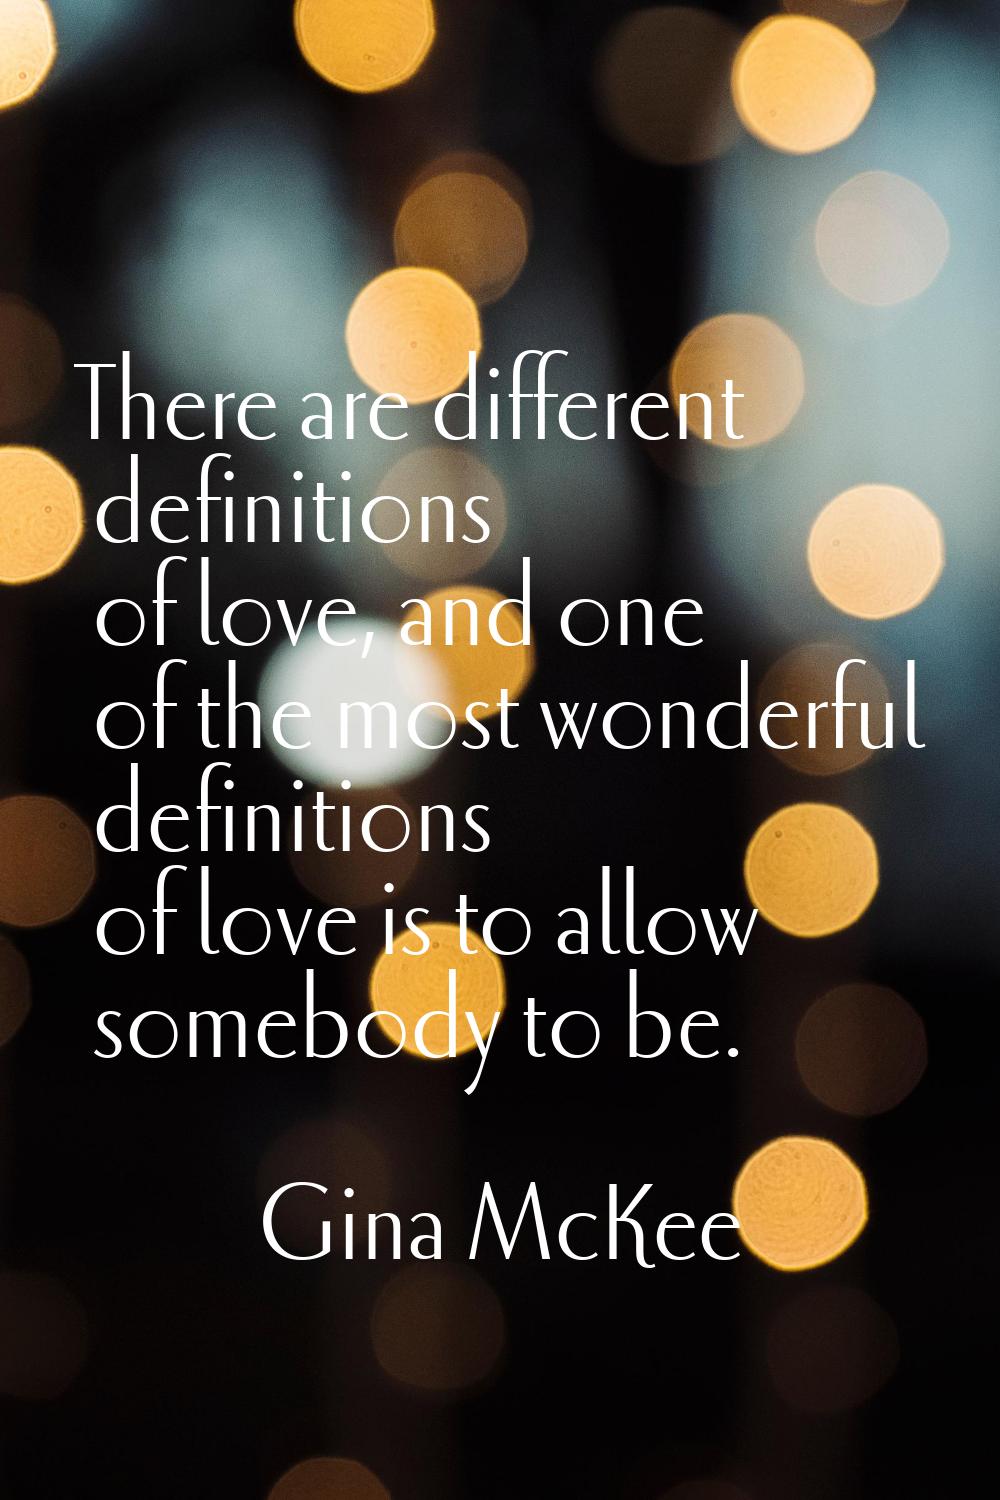 There are different definitions of love, and one of the most wonderful definitions of love is to al